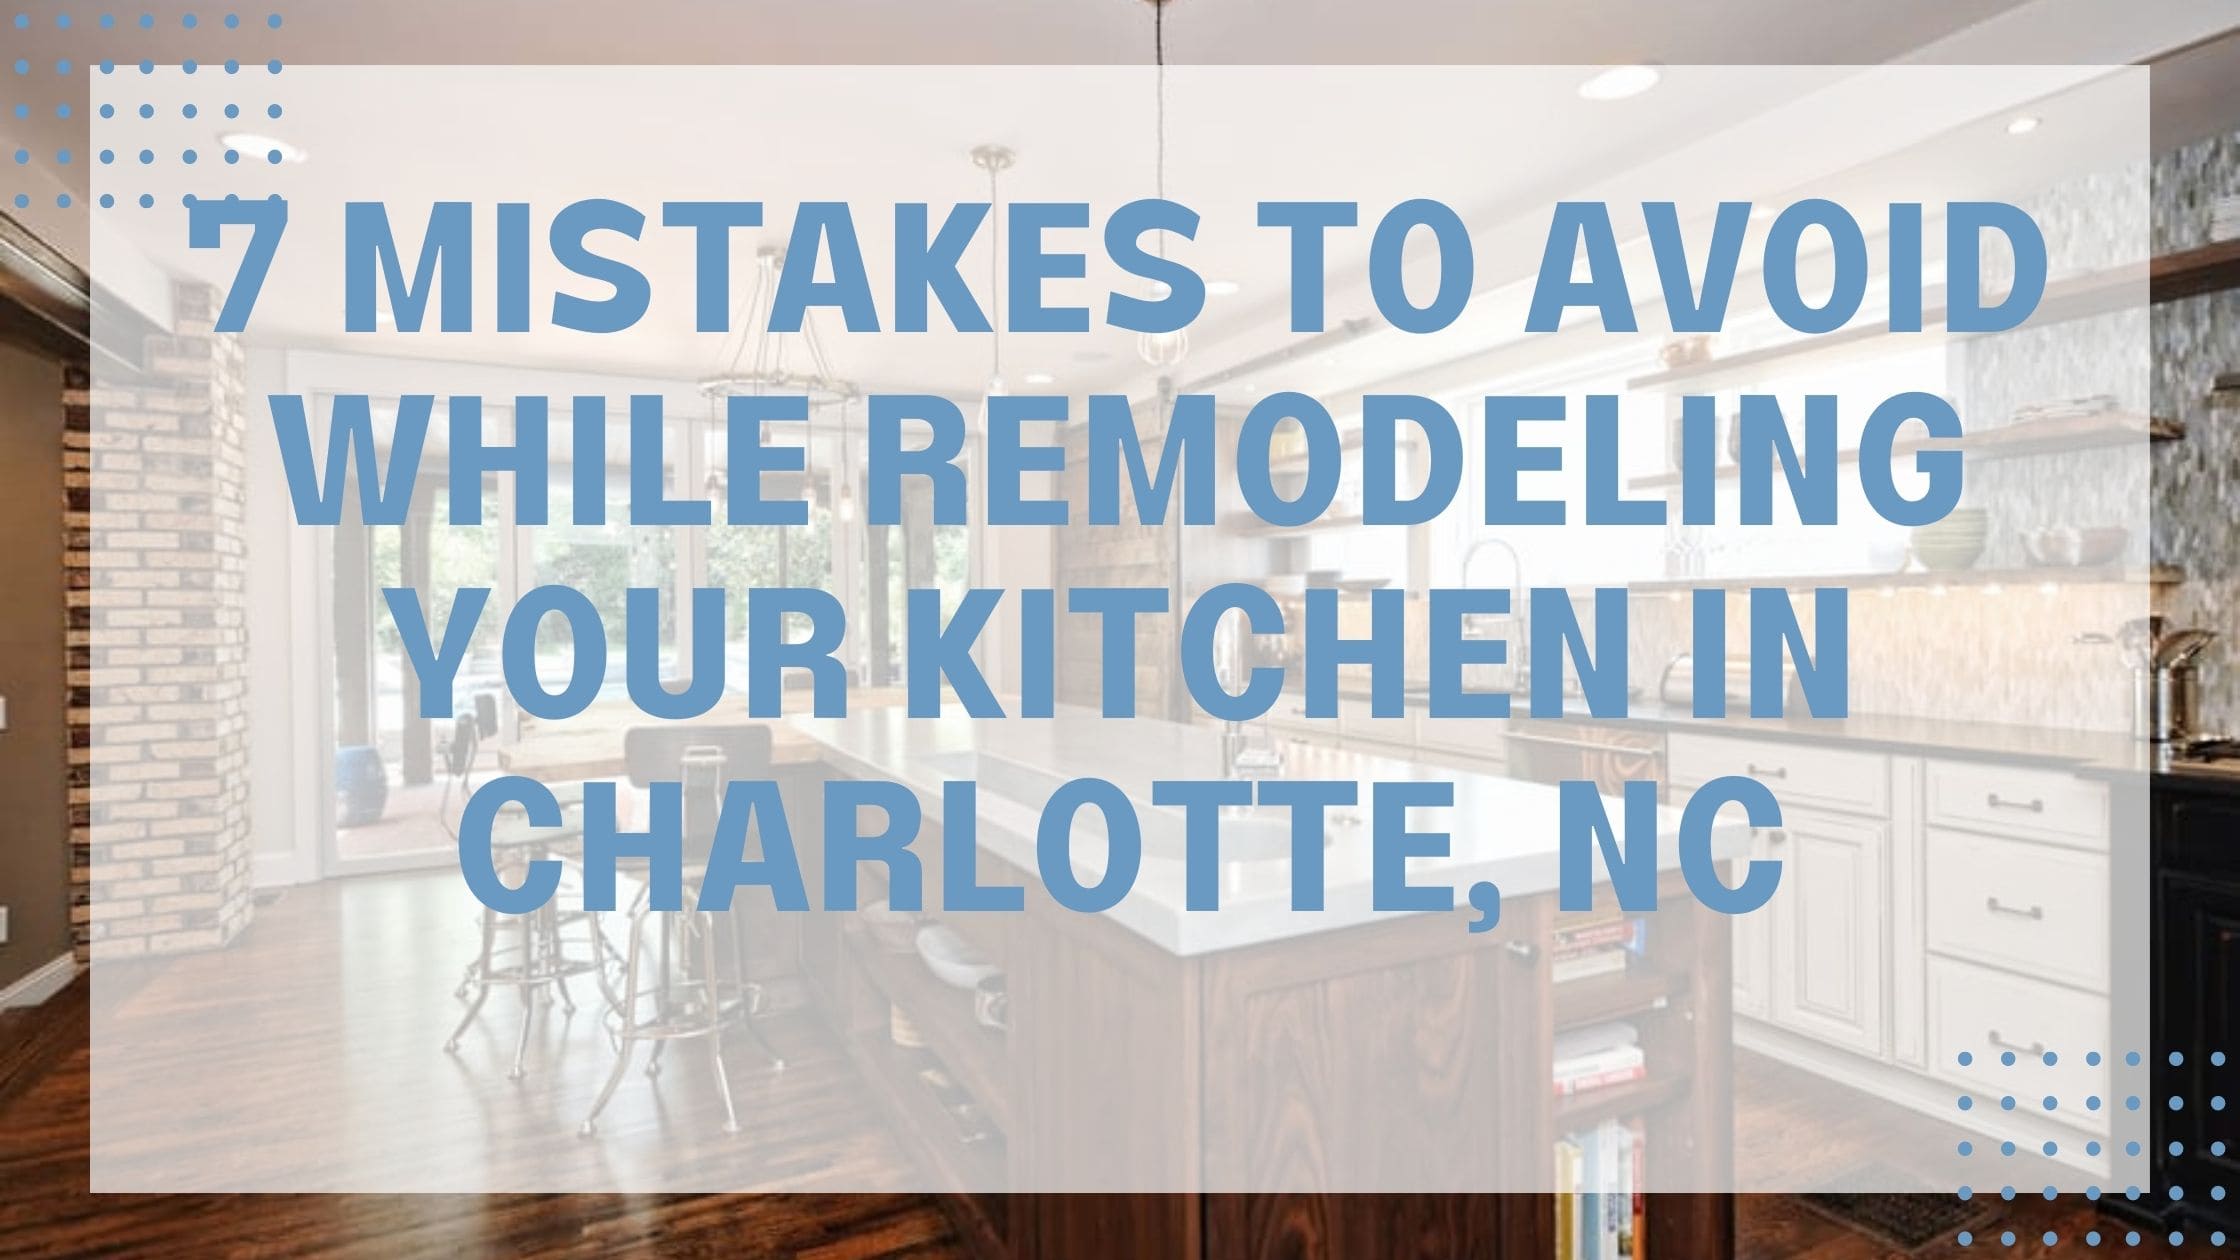 7 Mistakes to Avoid While Remodeling Your Kitchen in Charlotte, NC